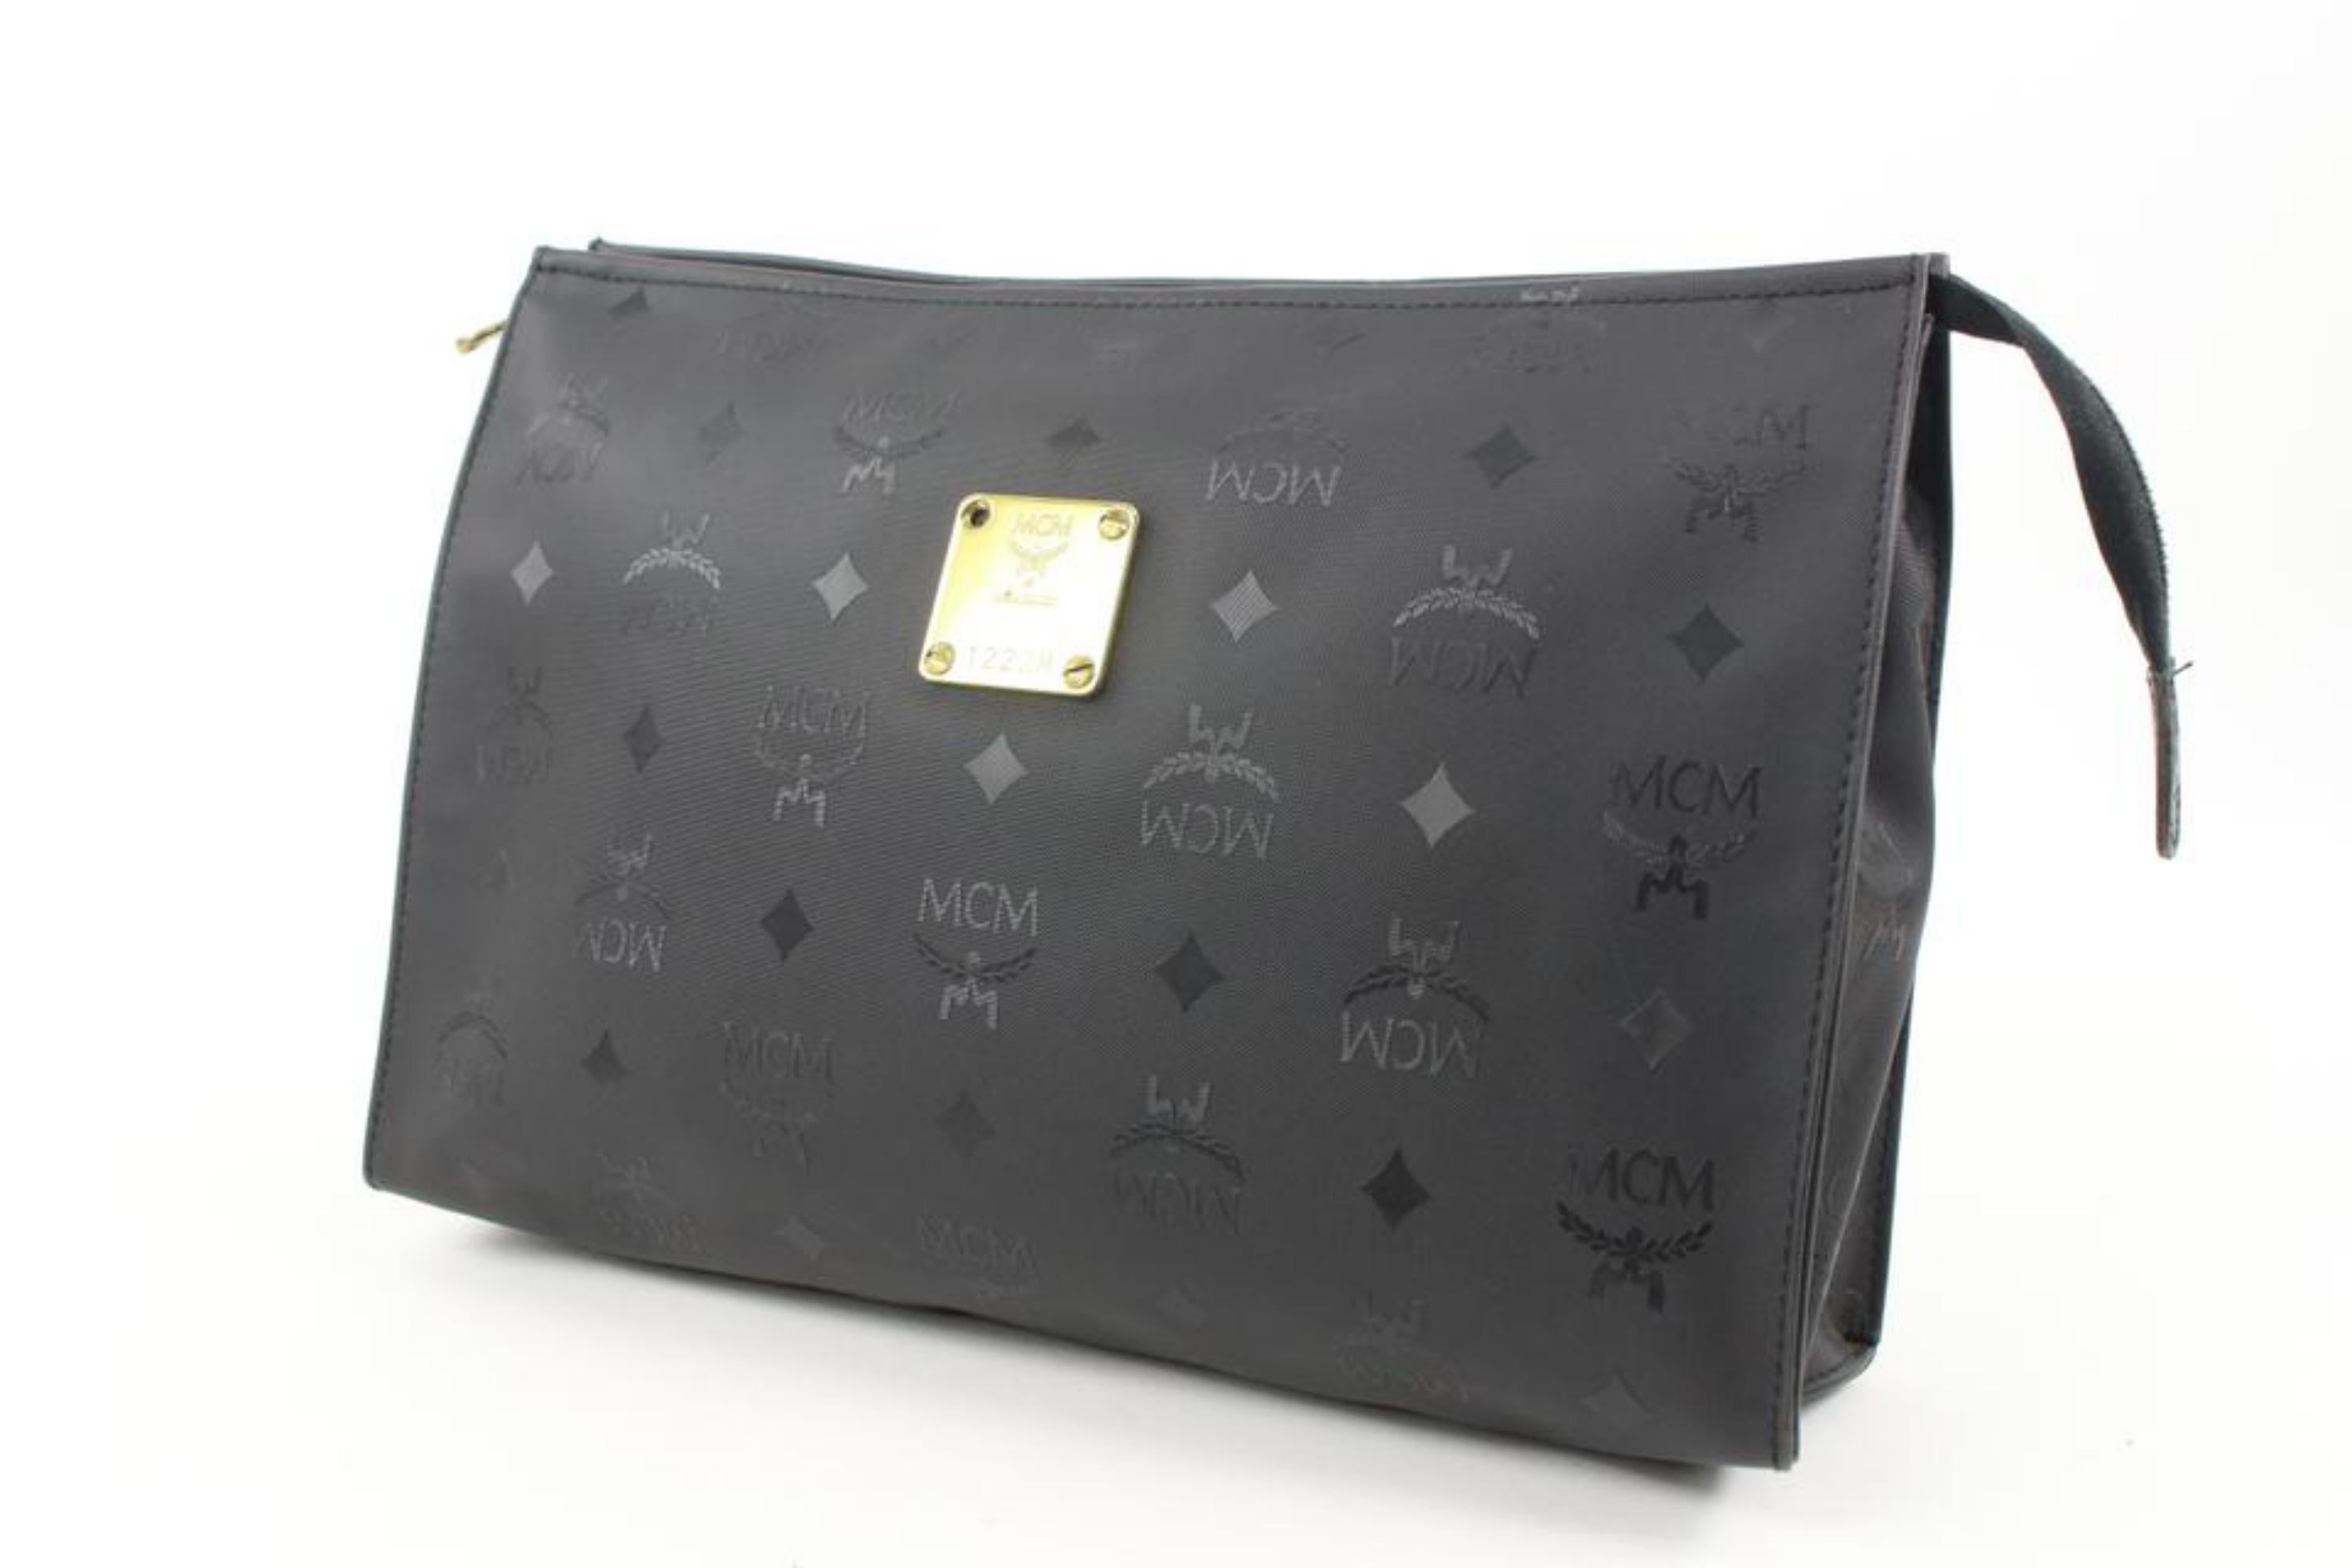 MCM Black Monogram Visetos Logo Toiletry Pouch Make Up Case Clutch 118m35
Date Code/Serial Number: 1222M
Made In: Germany
Measurements: Length:  11